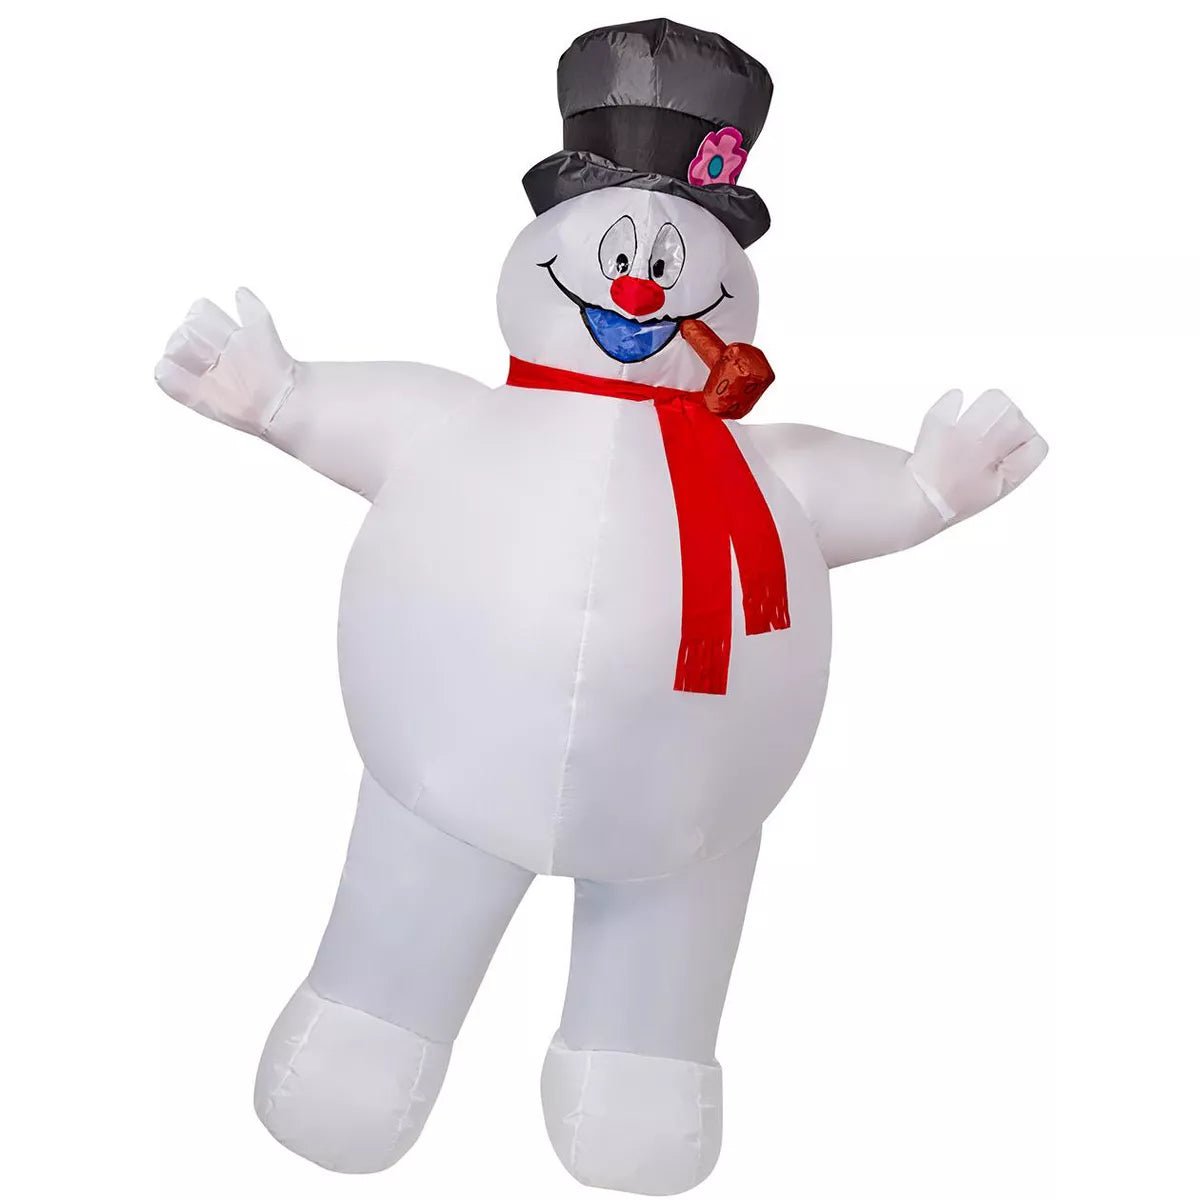 Frosty the Snowman Inflatable - worldclasscostumes